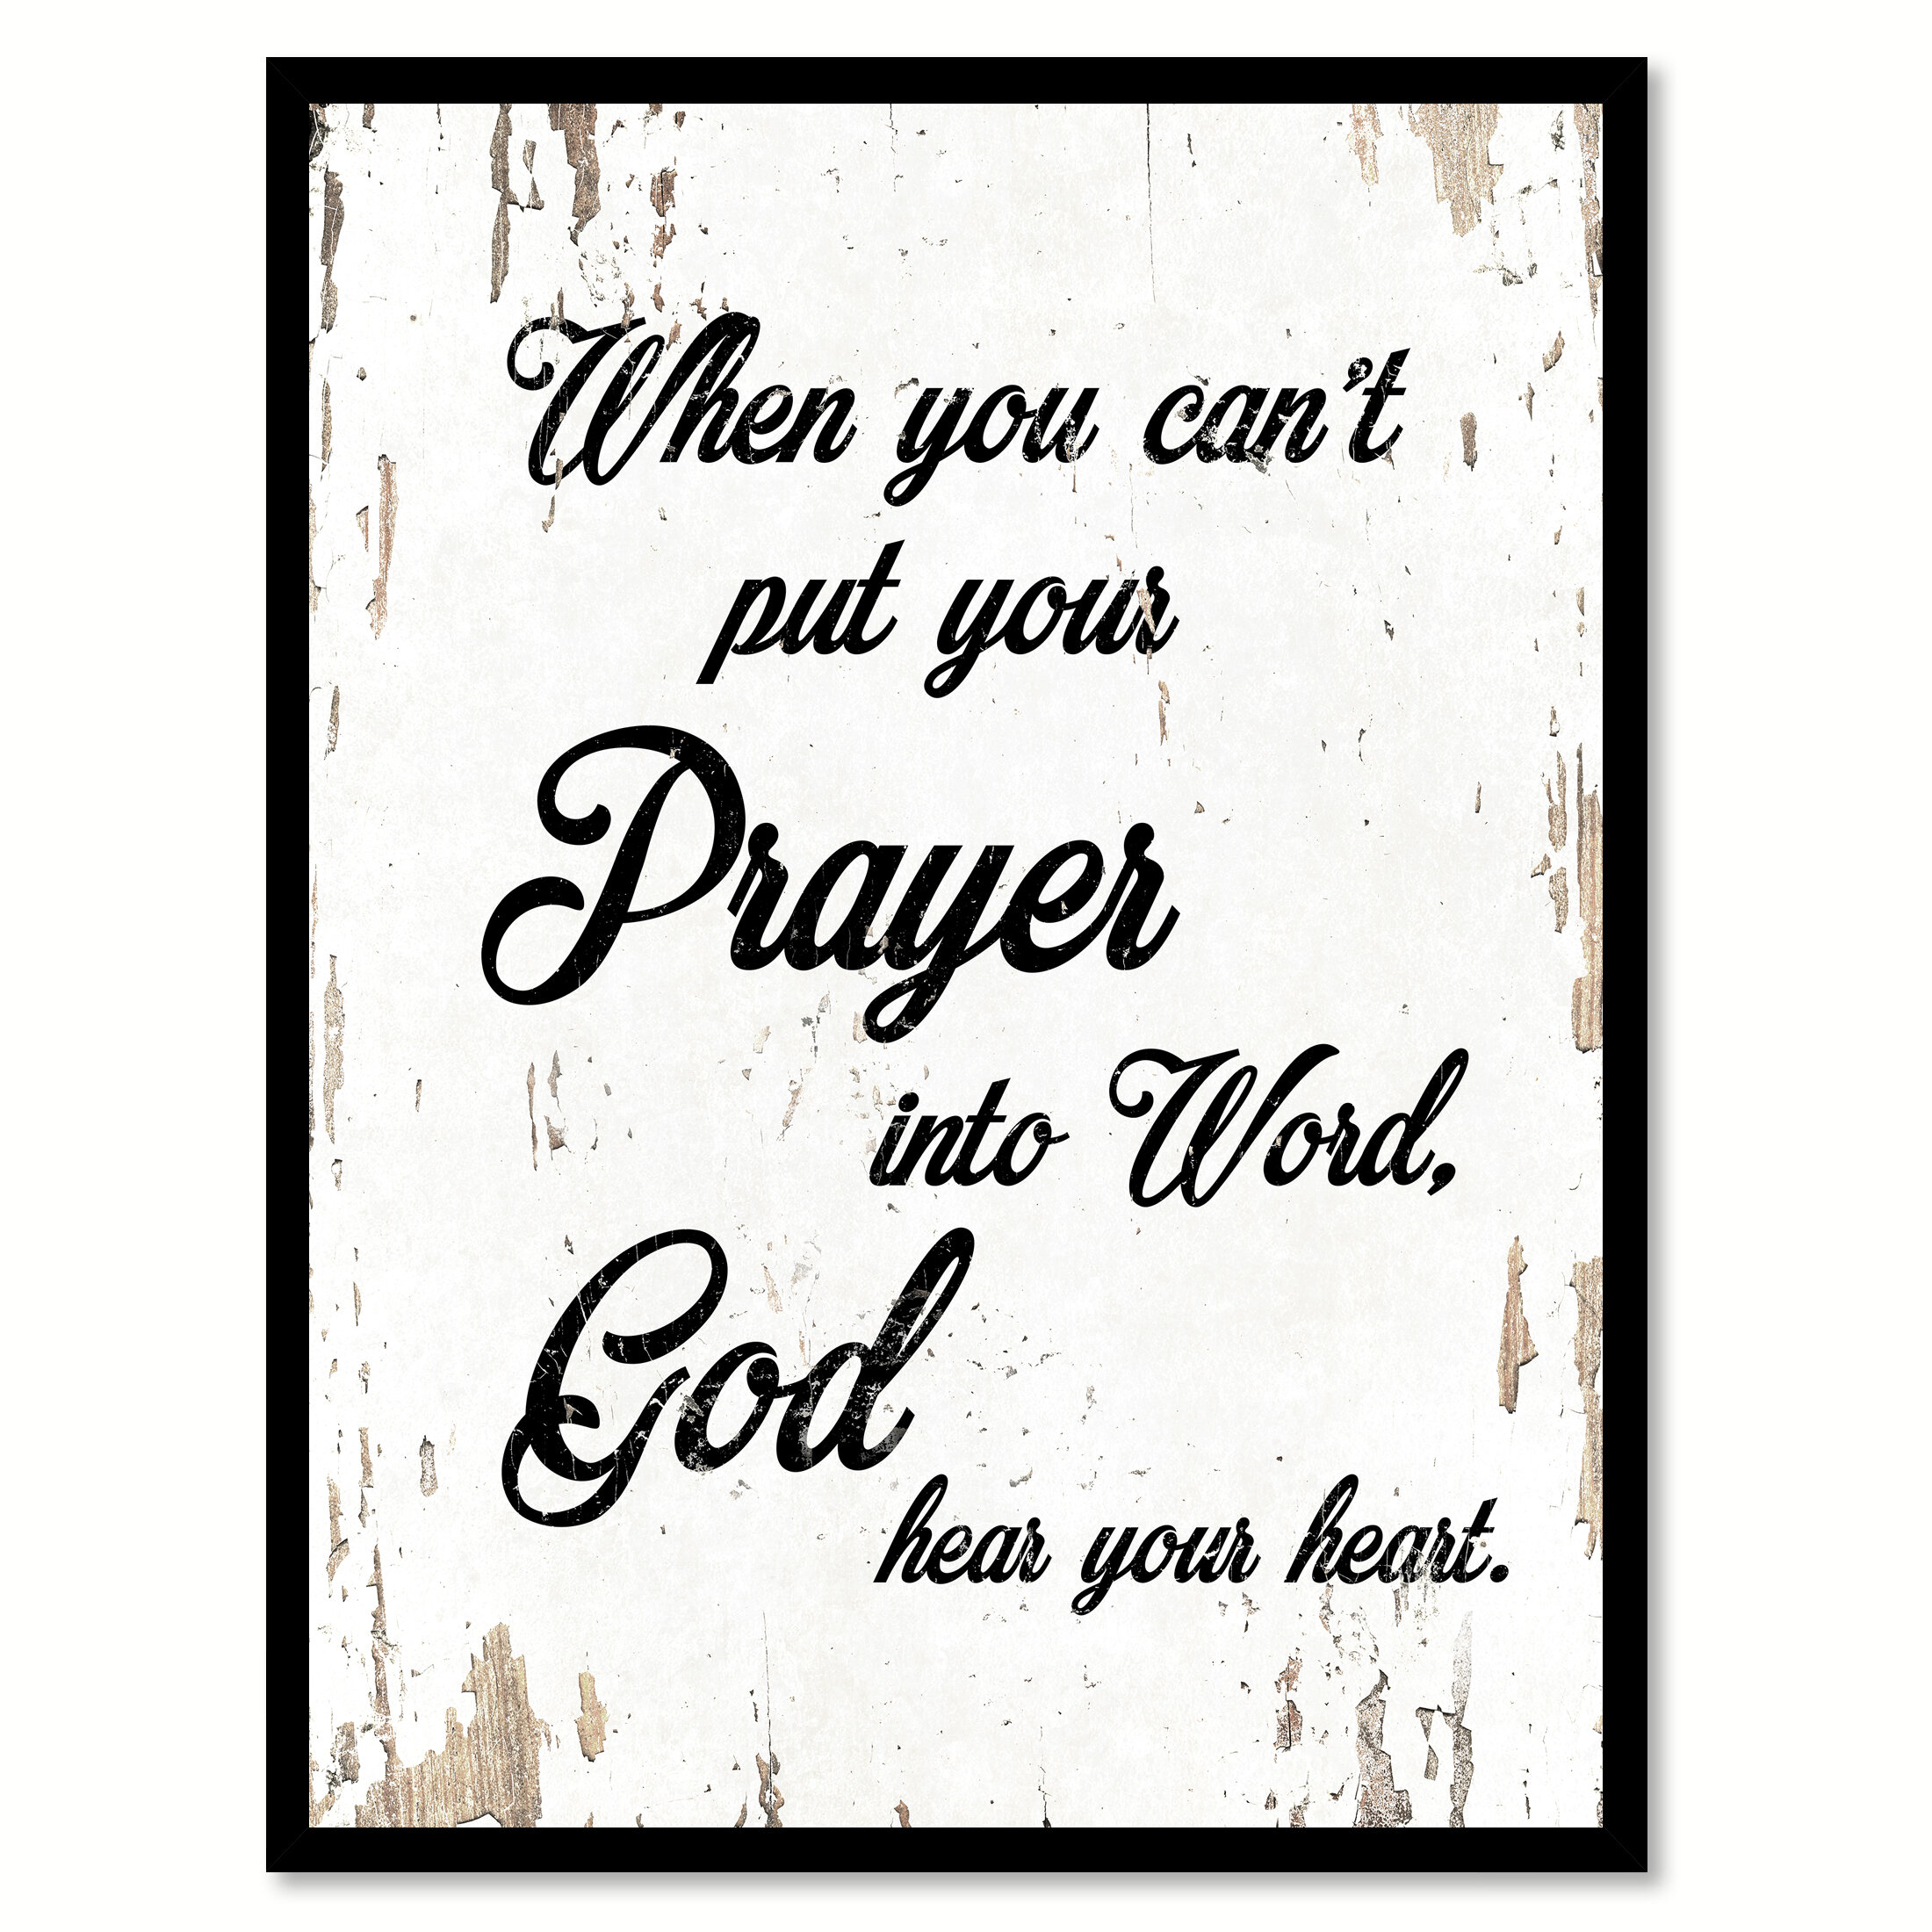 prayer images with words